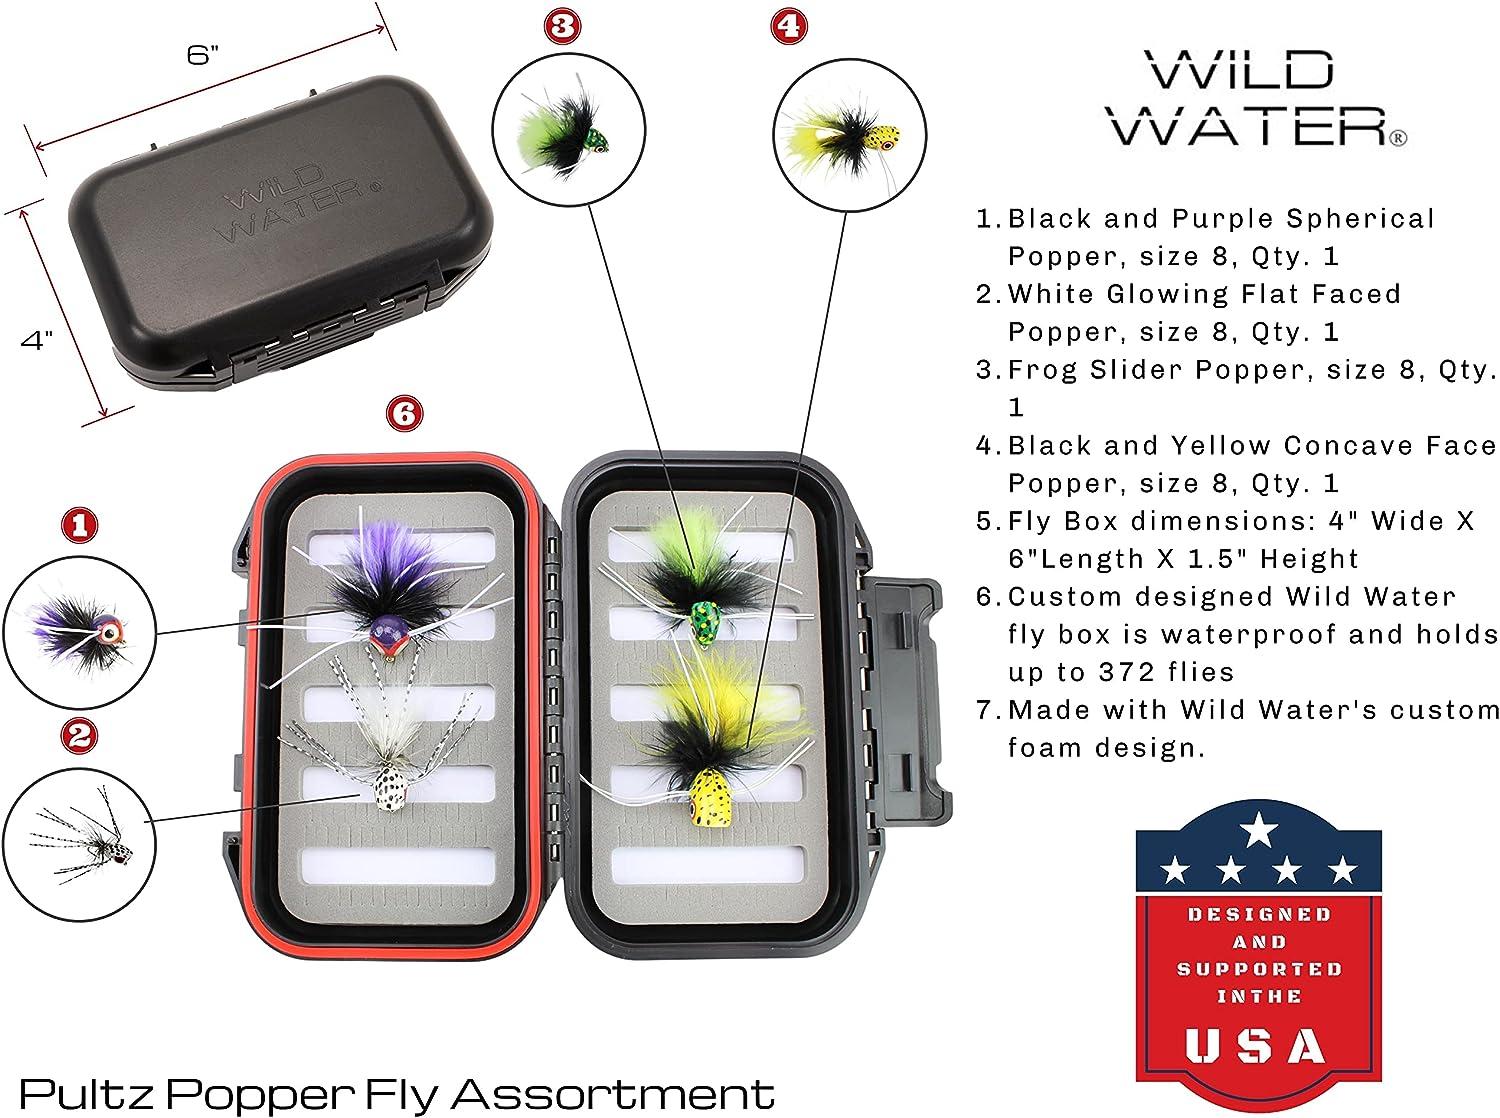 Wild Water Fly Fishing Complete 5/6 Starter Package 9′ Rod